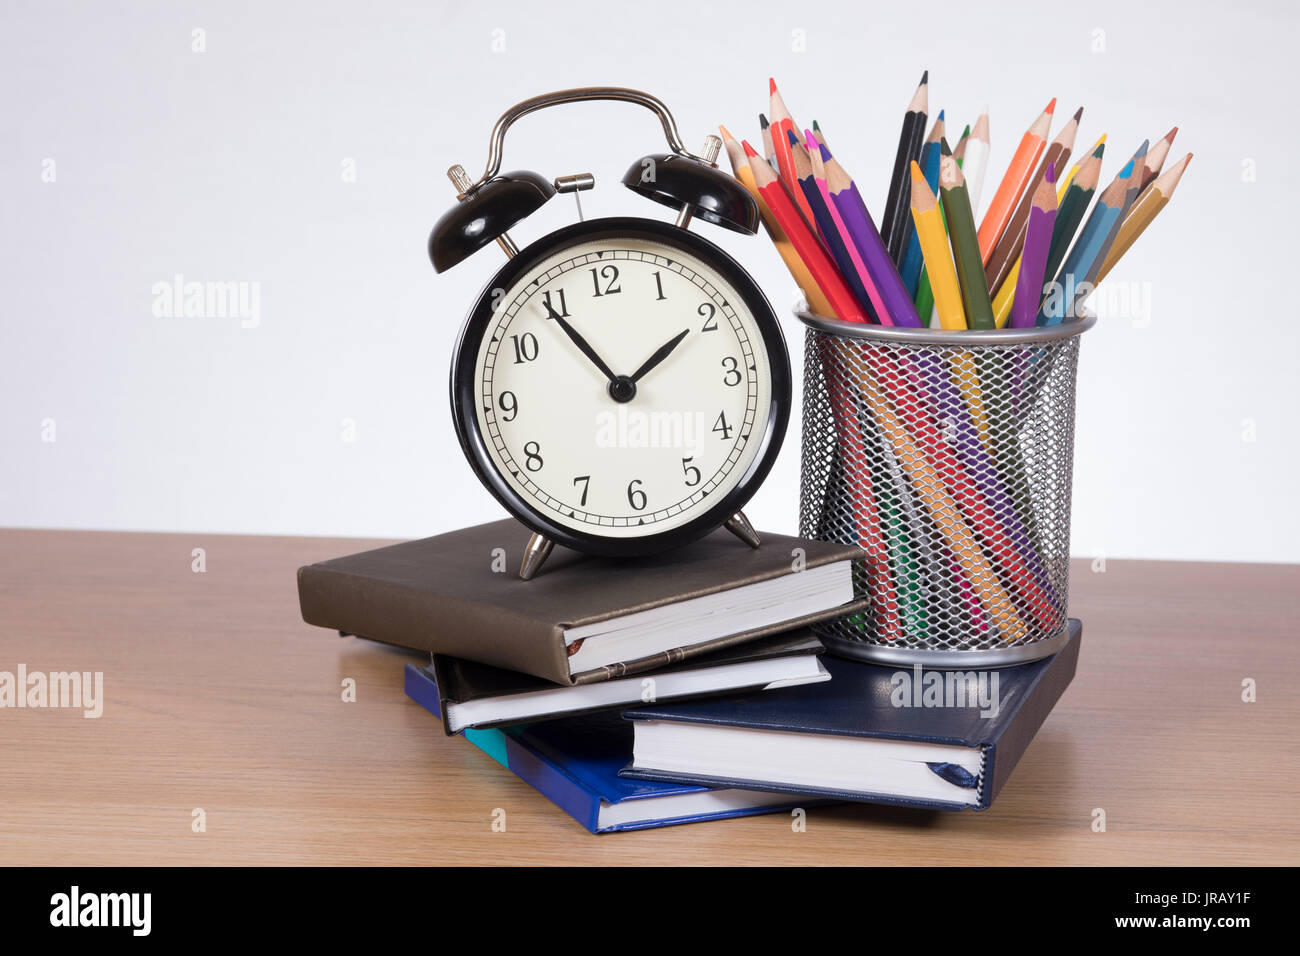 Alarm clock standing on pile of planners with colored pencils in container Stock Photo